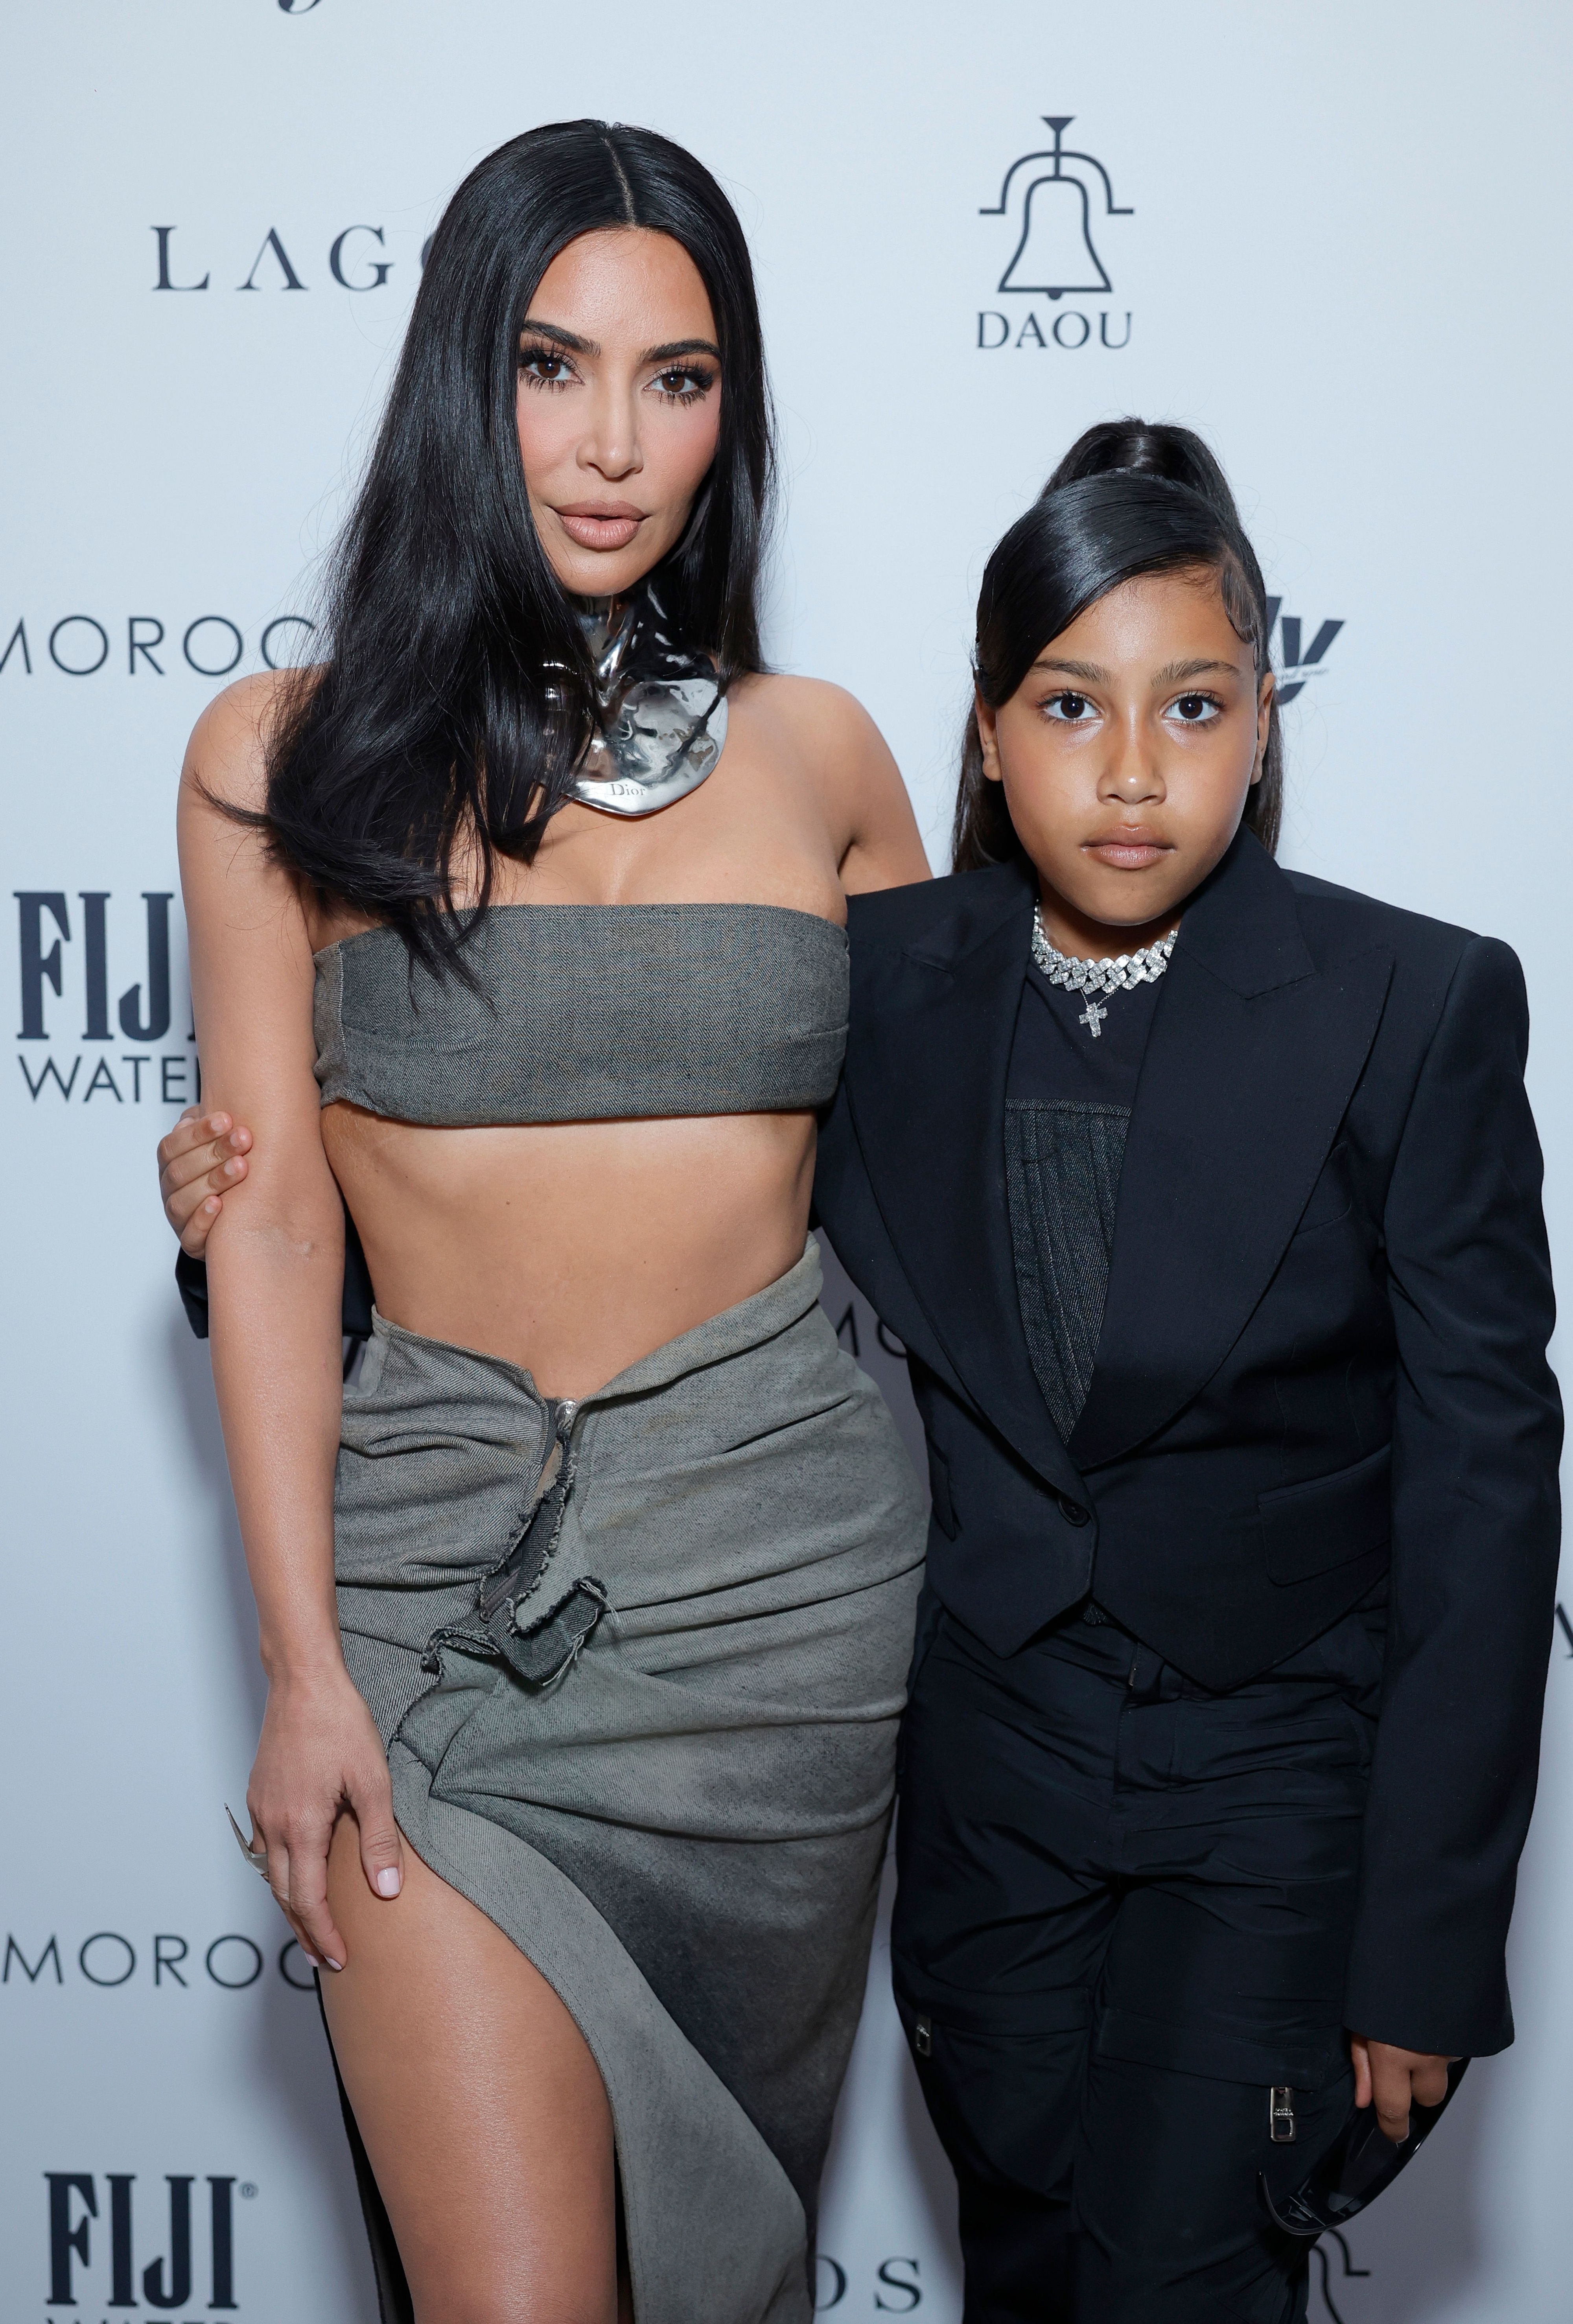 Kim Kardashian in a crop top and skirt with North West in a black suit, both posing at an event